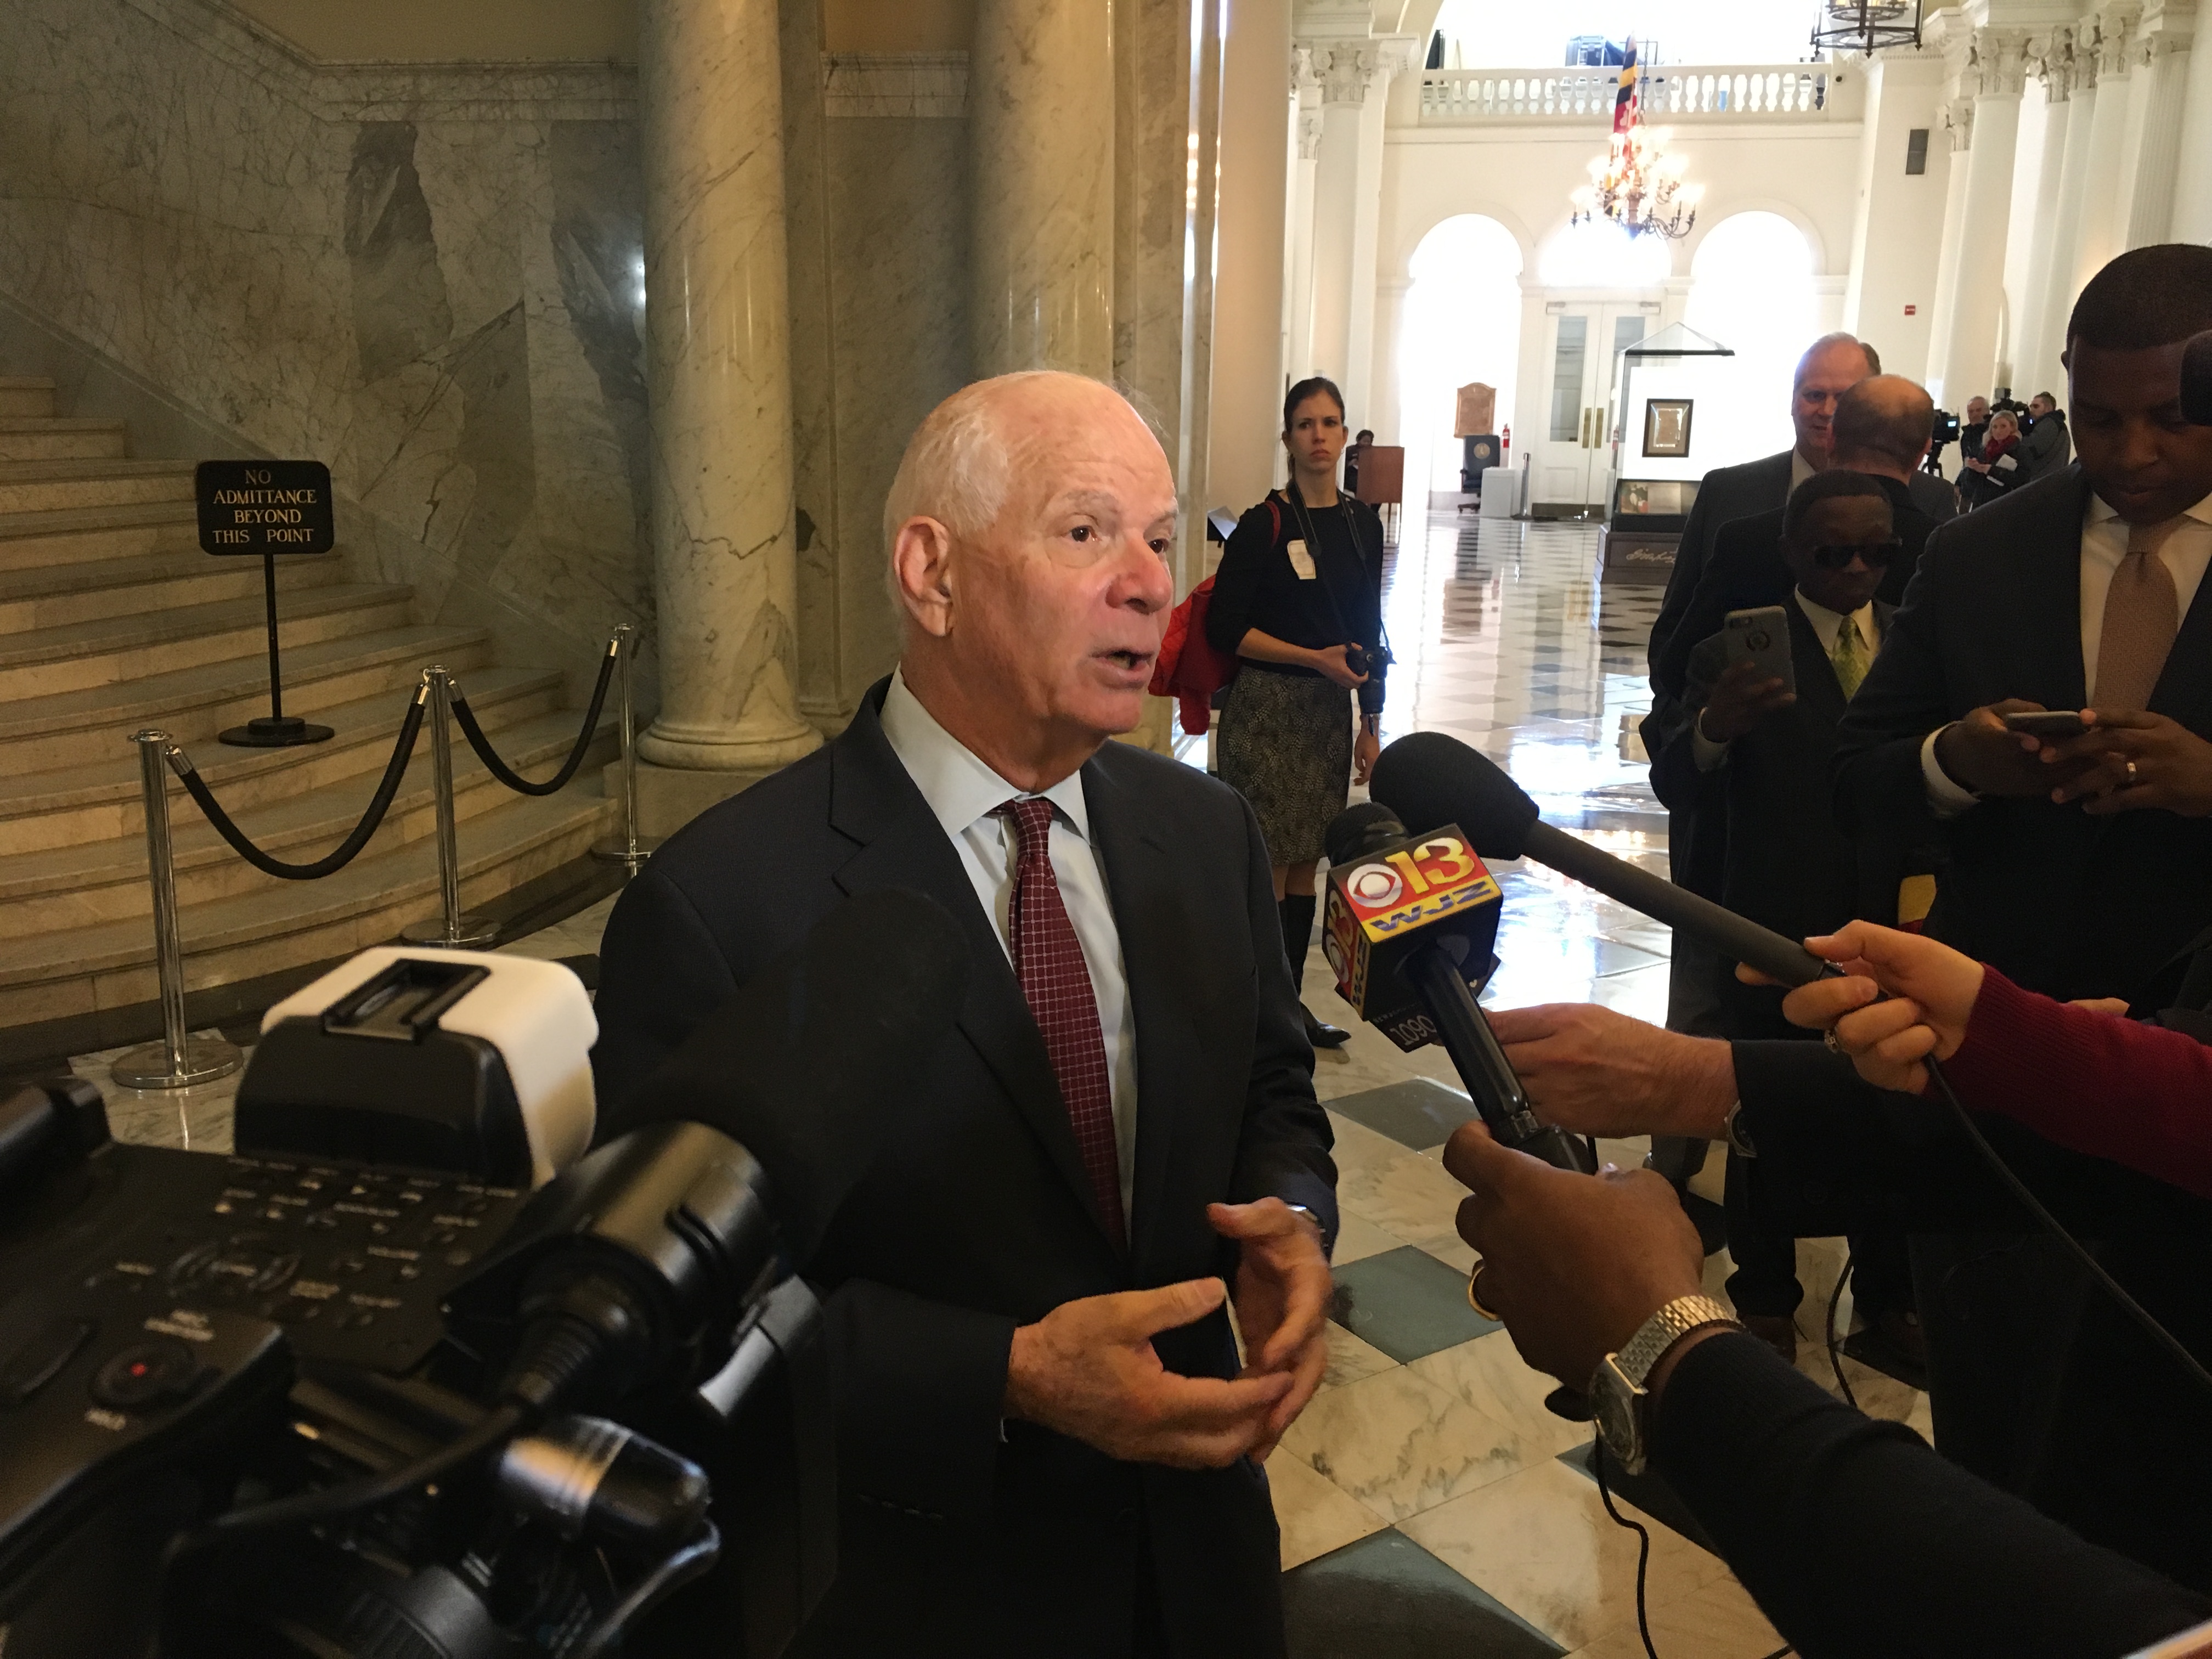 U.S. Sen. Ben Cardin, D-Md., addresses reporters at the Maryland State House on the opening day of the General Assembly’s 2016 session in Annapolis on January 13, 2016. (Capital News Service photo by Amber Ebanks).